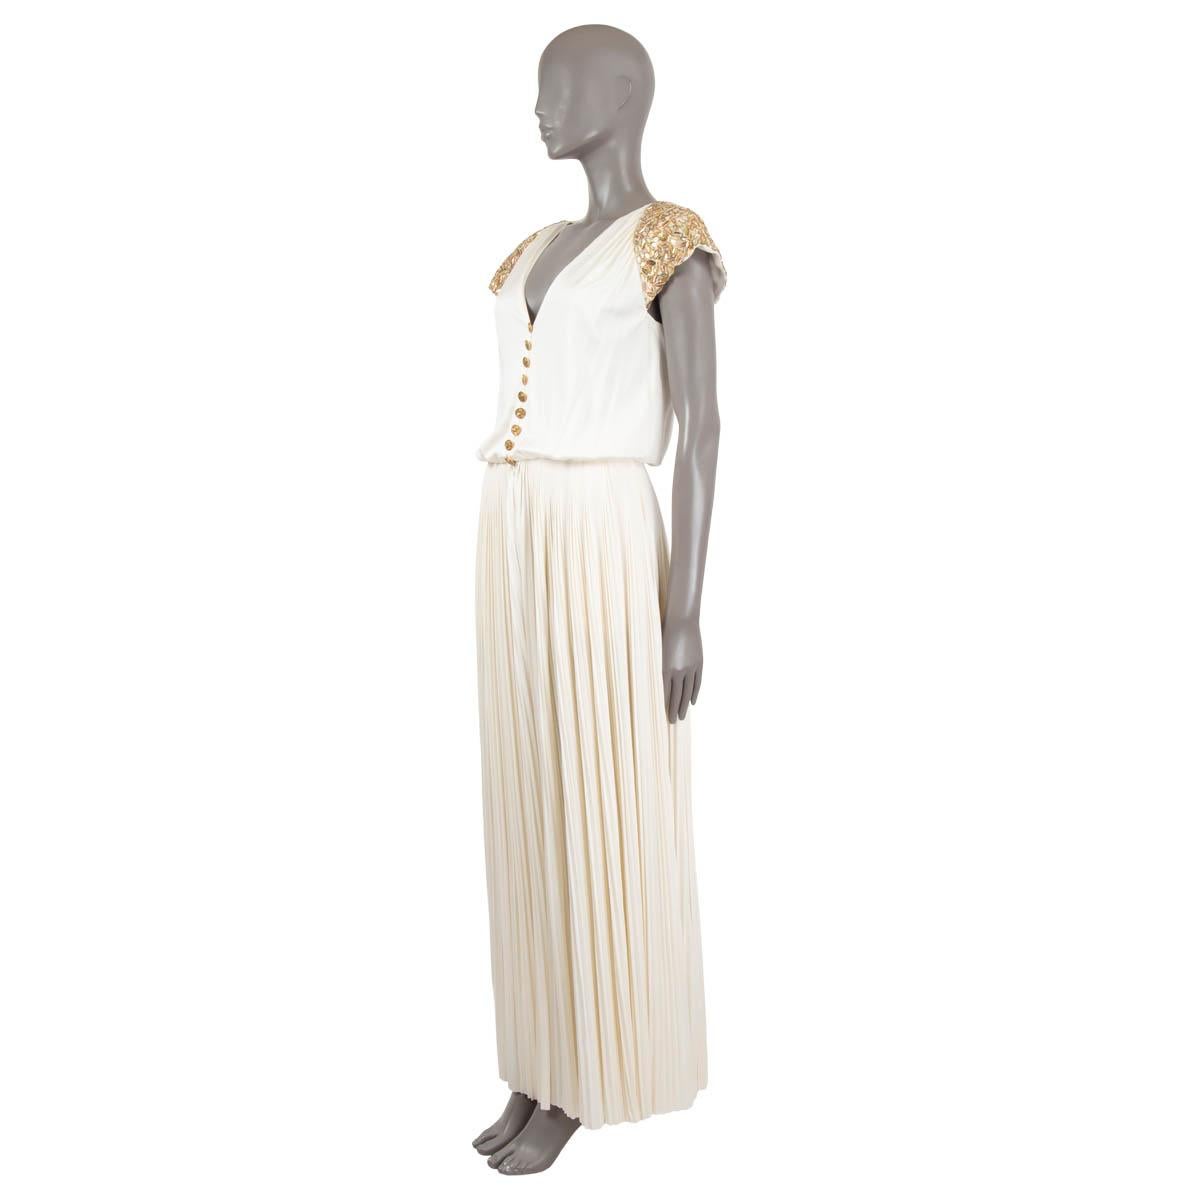 100% authentic Chanel beaded cap sleeve jumpsuit in ivory viscose (83%) and silk (17%) with wide pleated legs and nine embellished gold-tone metal buttons at front. Lined in silk (100%). Has been worn once and is in virtually new condition. 

2018